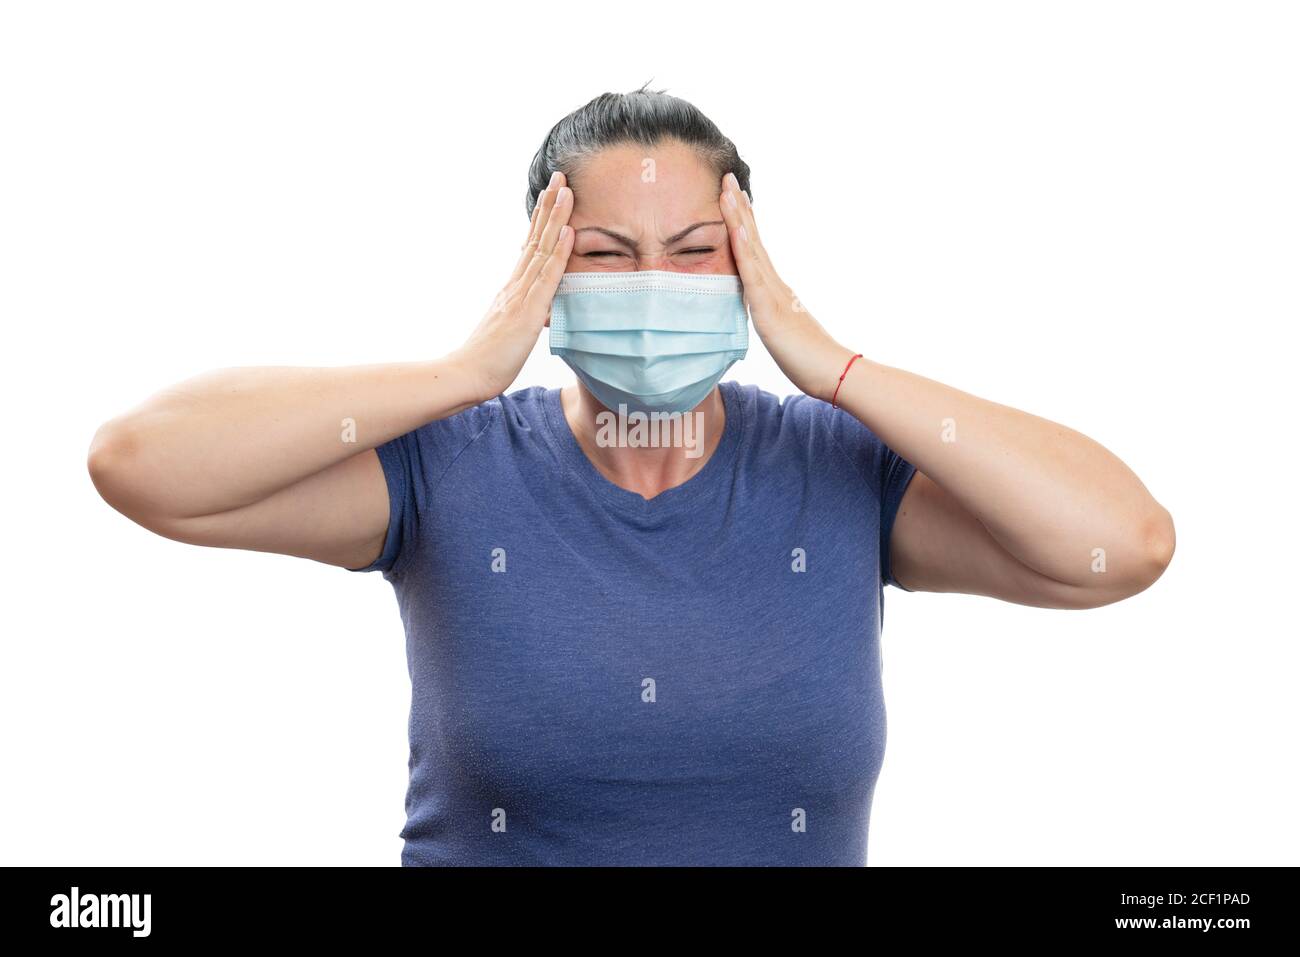 Adult female with headache touching temples as covid19 coronavirus infection flu symptom concept wearing disposable medical or surgical protection mas Stock Photo